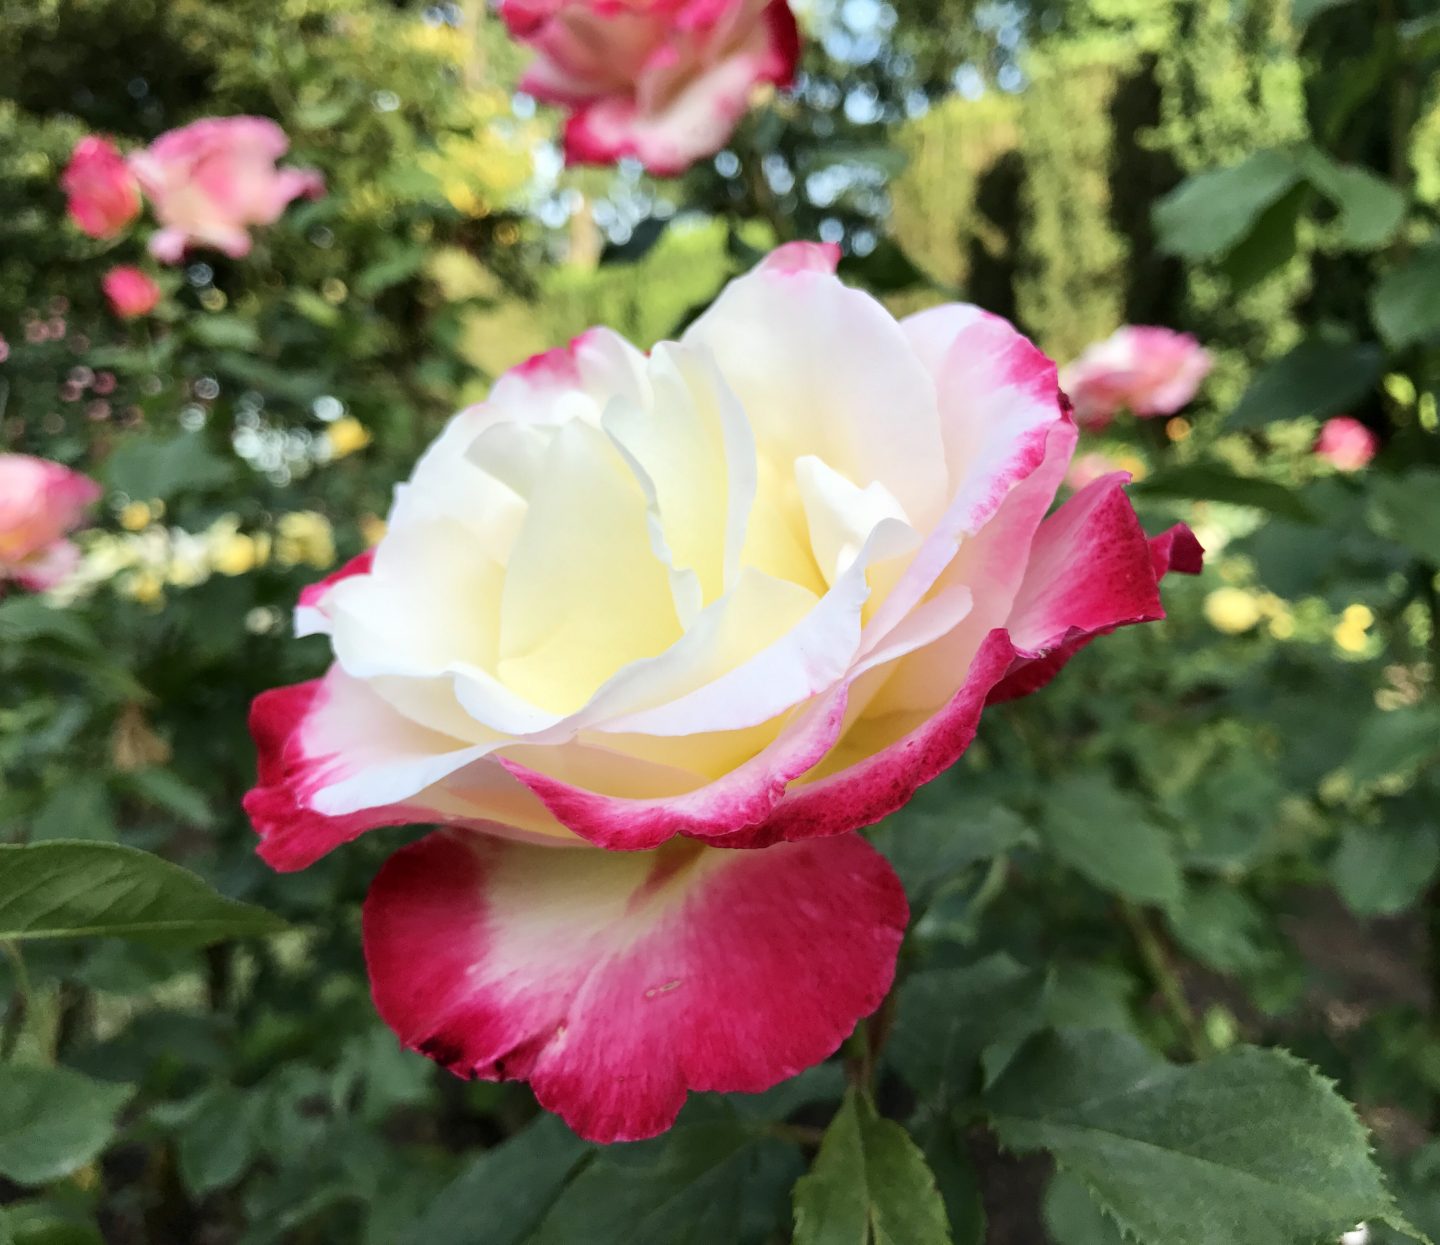 The International Rose Test Garden is only about 1/2 hour from the resort.